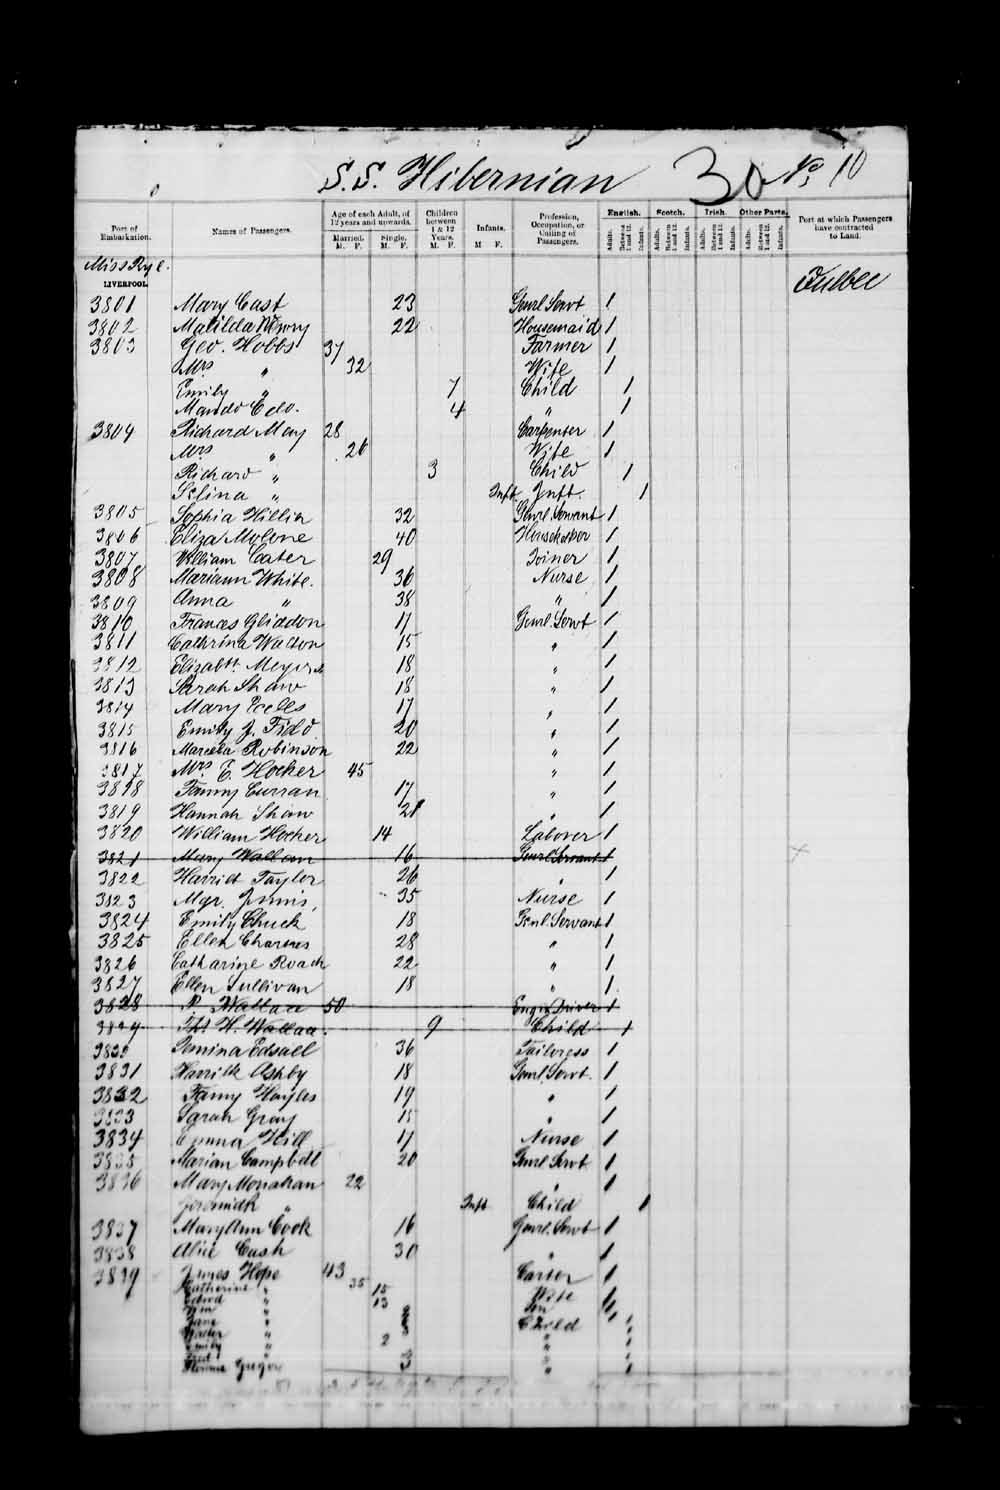 Digitized page of Passenger Lists for Image No.: e003530474